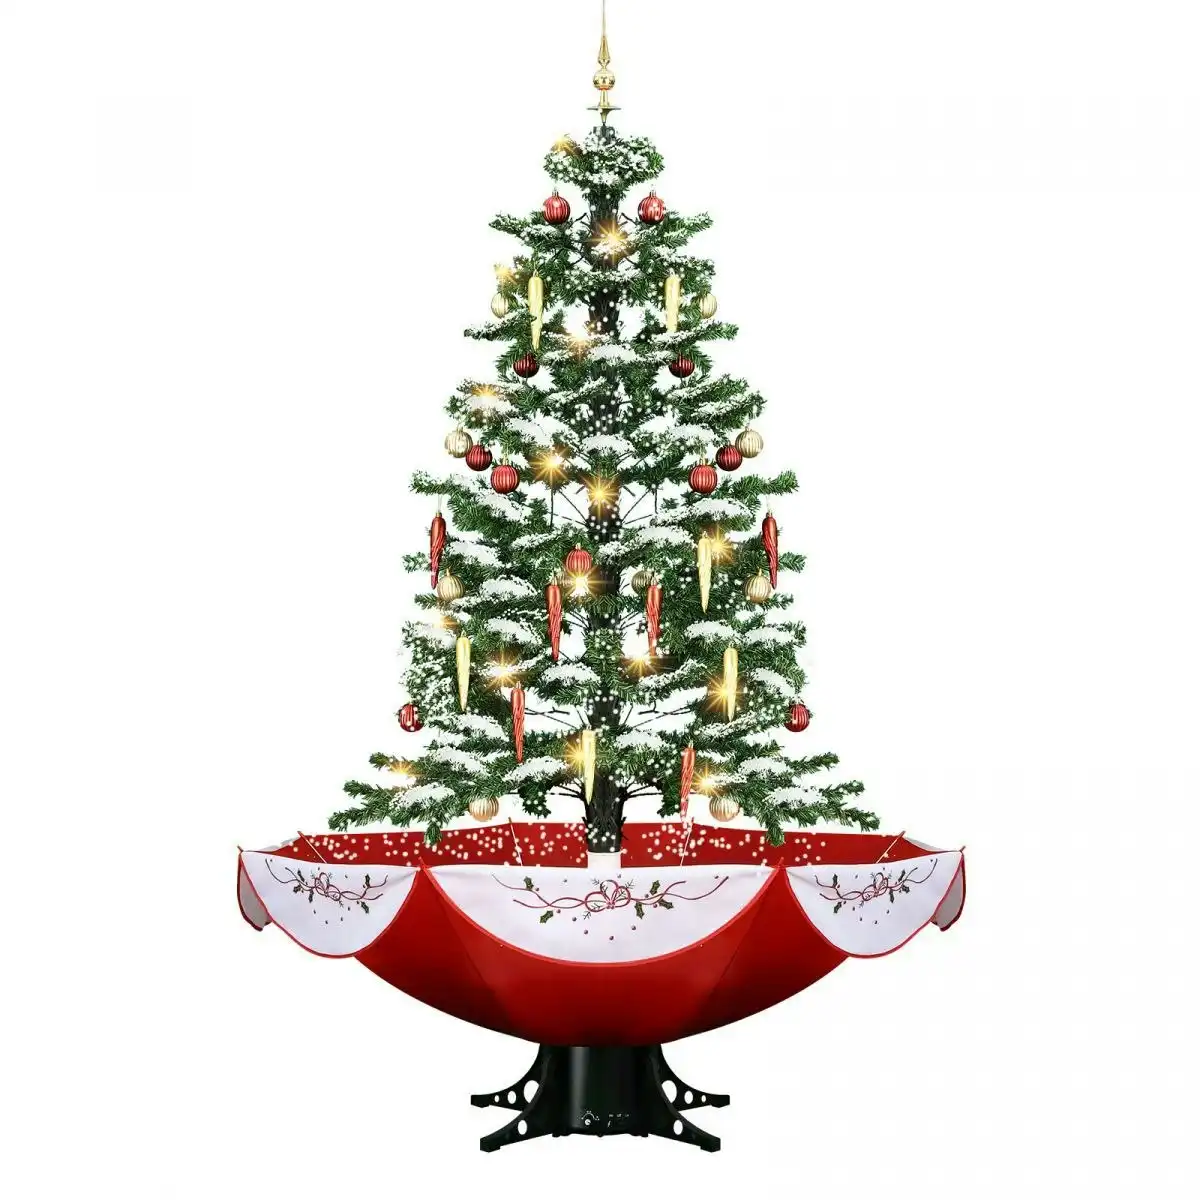 Solight Christmas Tree Decorated Snowing LED String Fairy Lights Xmas Topper Artificial Decoration Balls Icicle Ornament Musical Umbrella Stand 190cm